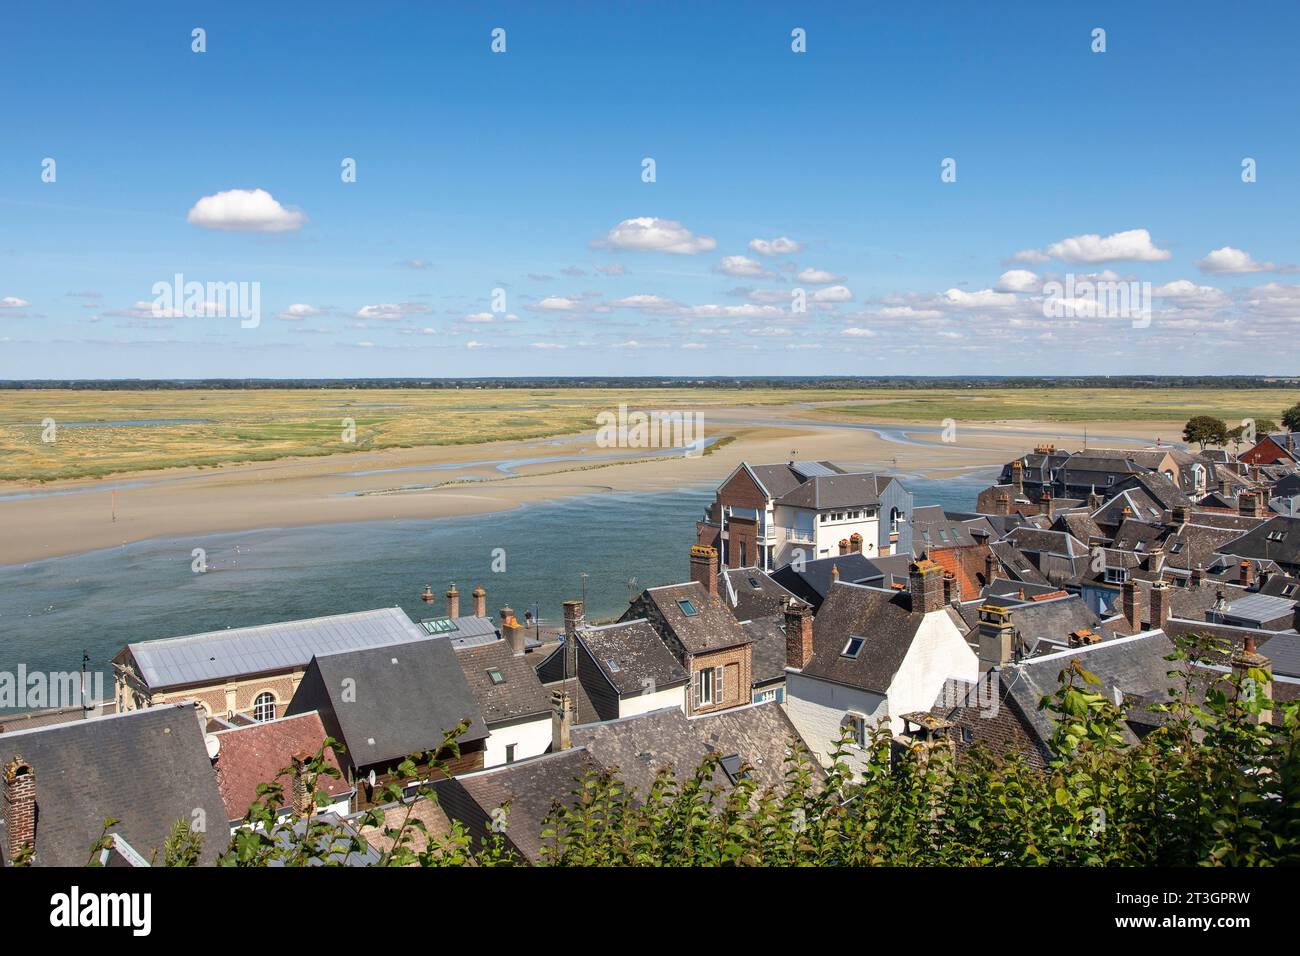 France, Somme, Baie de Somme, Saint Valery sur Somme, view of the town and bay Stock Photo